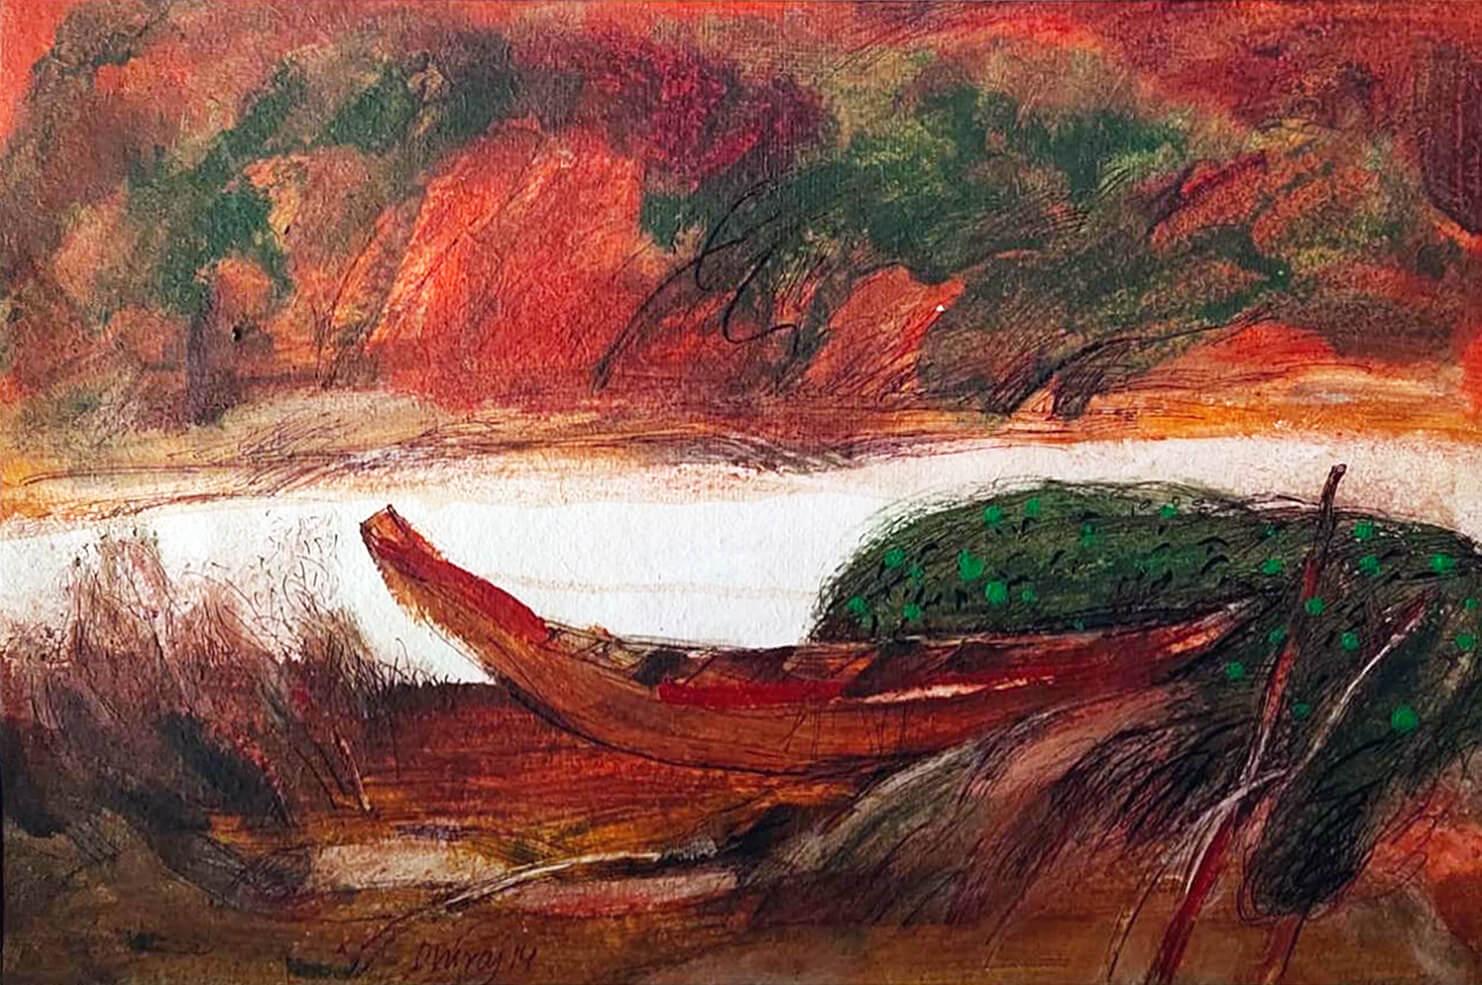 Boat, Mixed Media on Paper Color by Dhiraj Chowdhuri "In Stock"